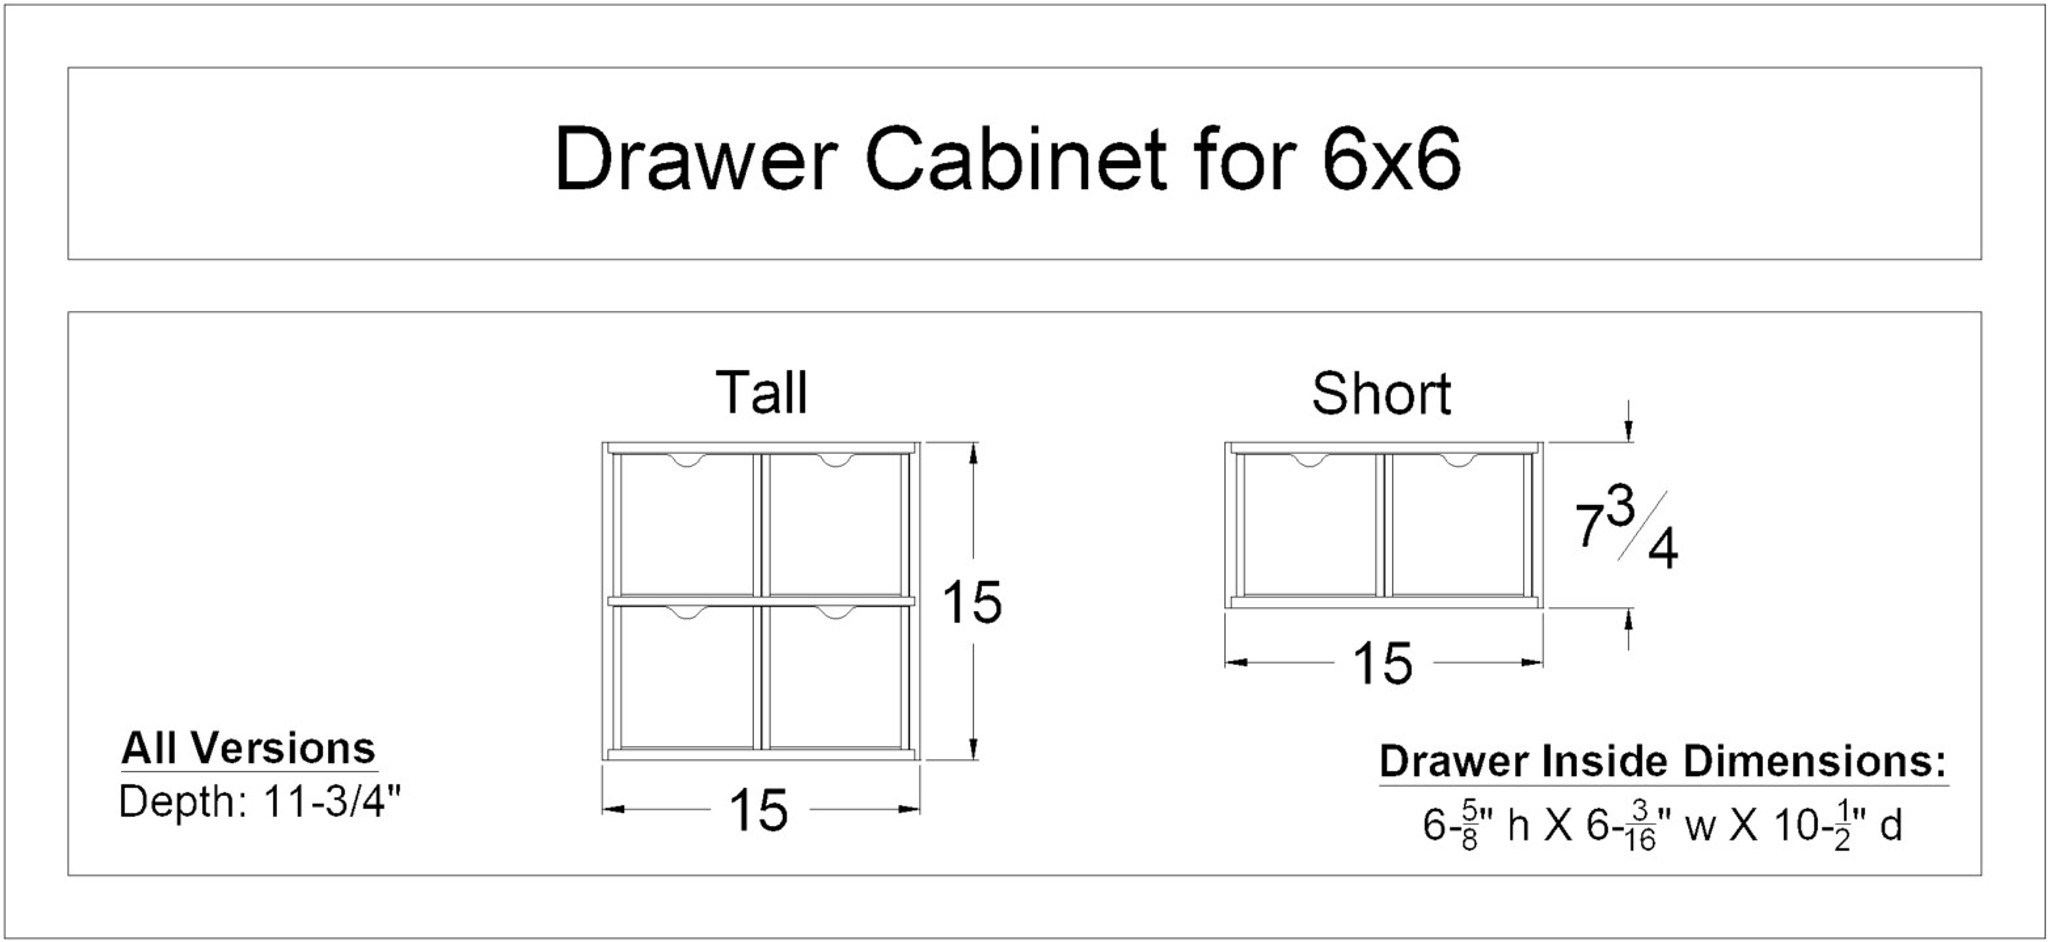 Drawer Cabinet for 6x6